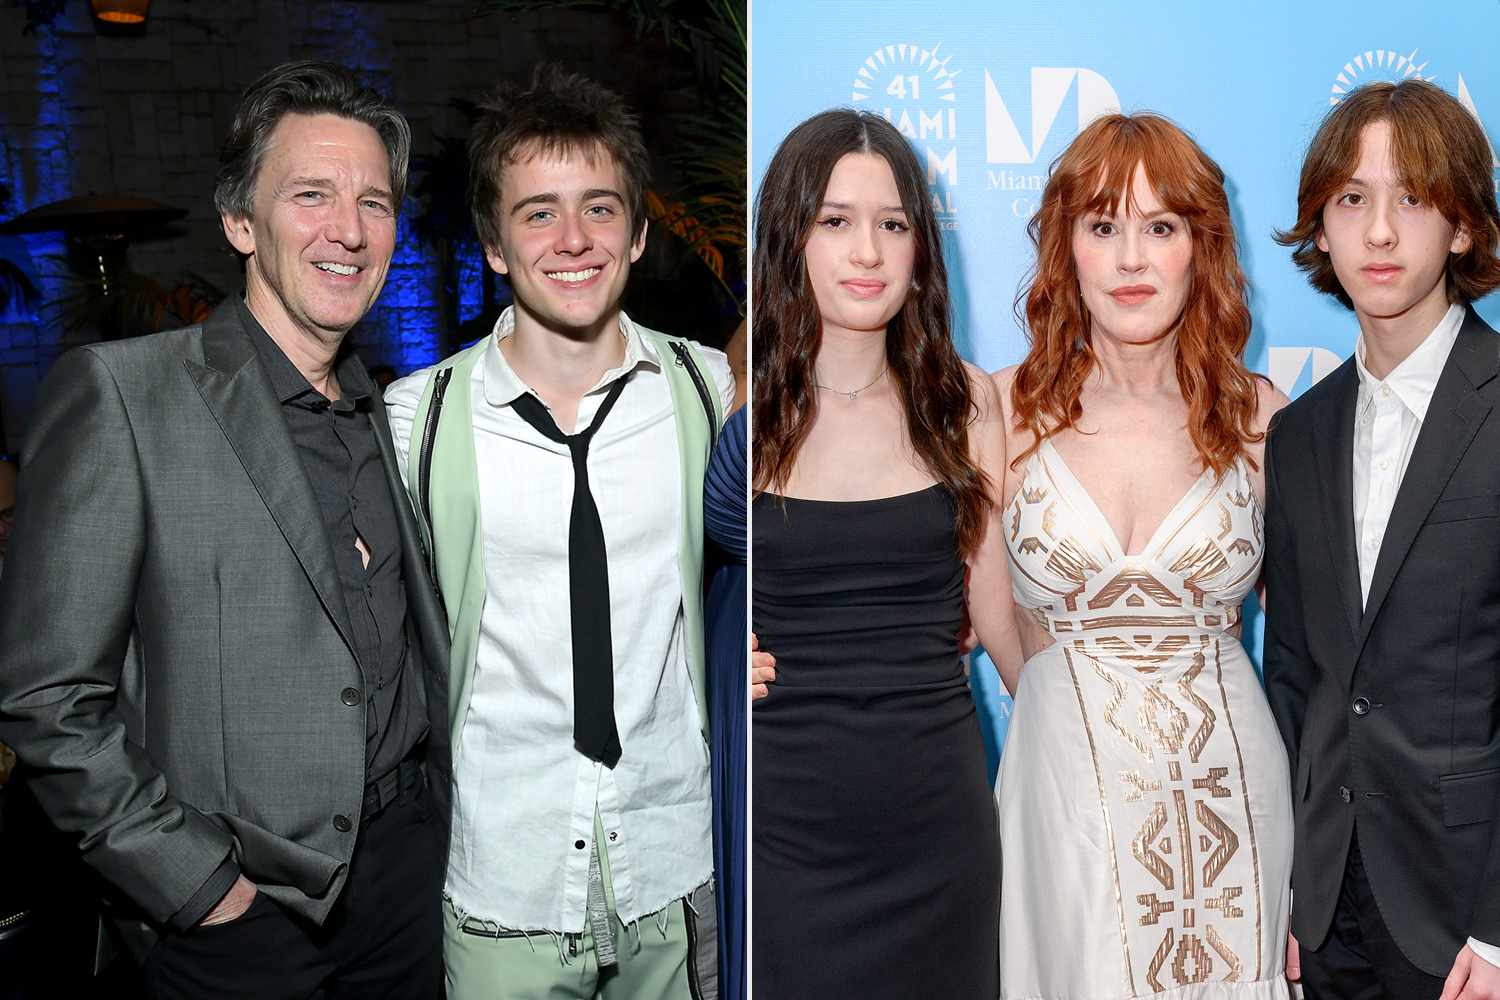 Brat Pack Babies, Husbands and Wives: Meet the Families of the A-list '80s Favorites